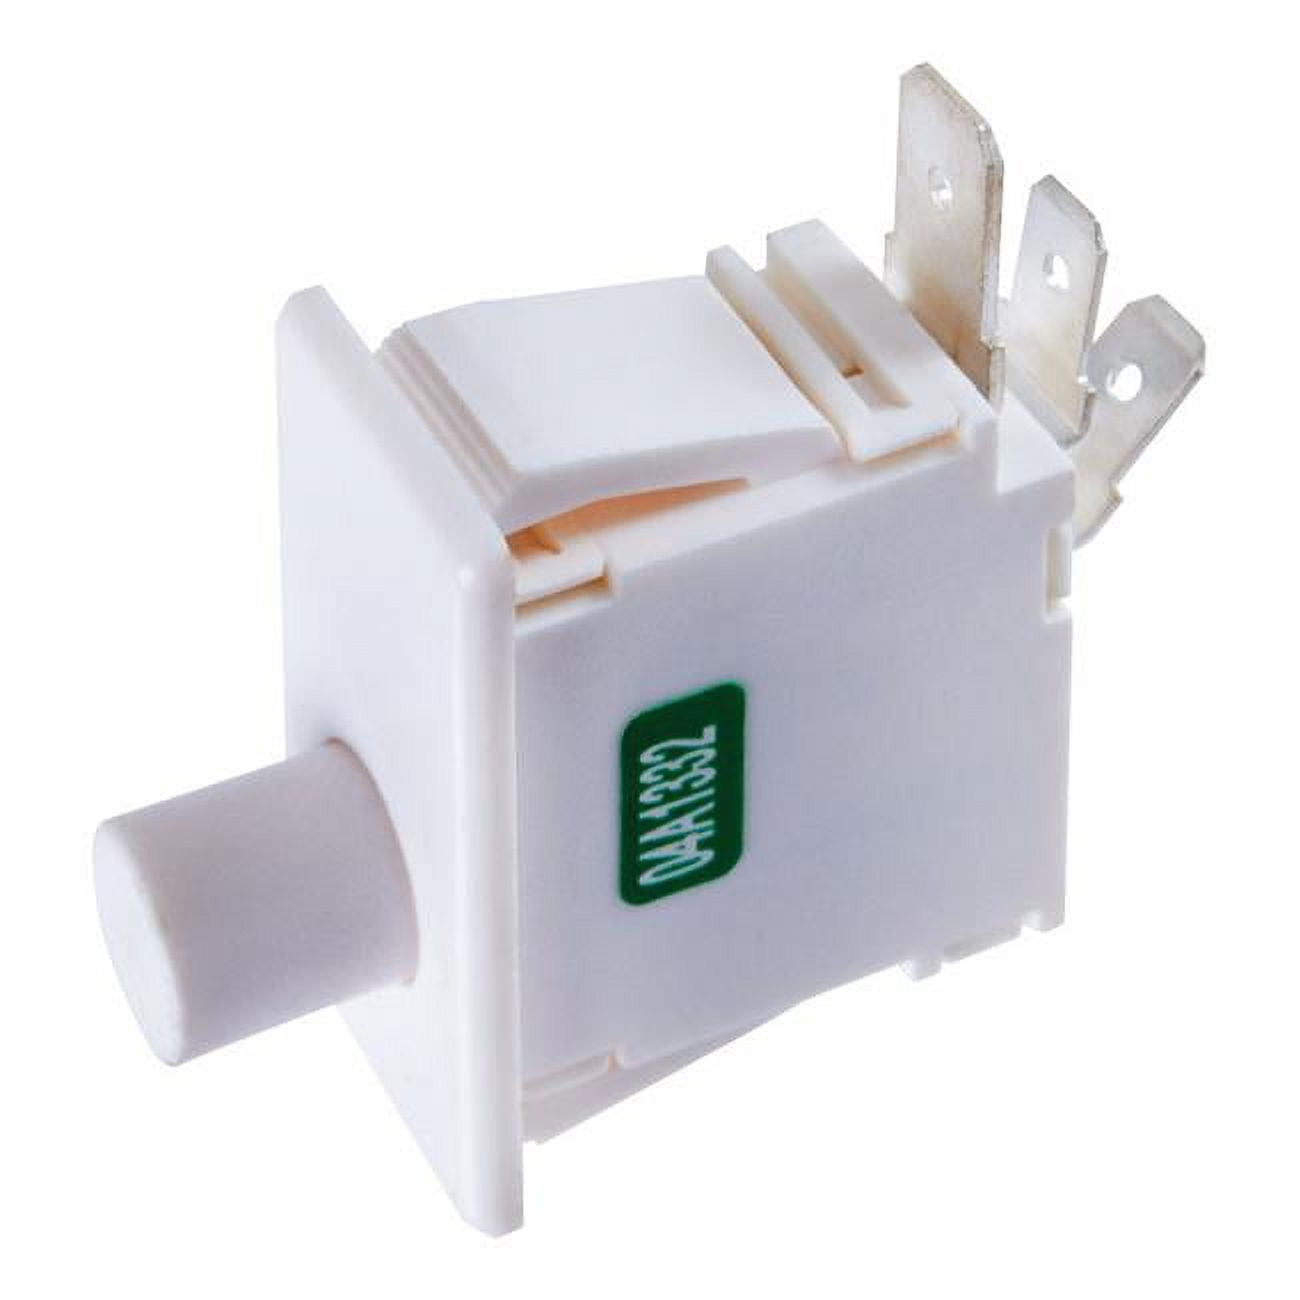 Picture of Jandorf 3467529 Single Plunger Push Button Switch, White